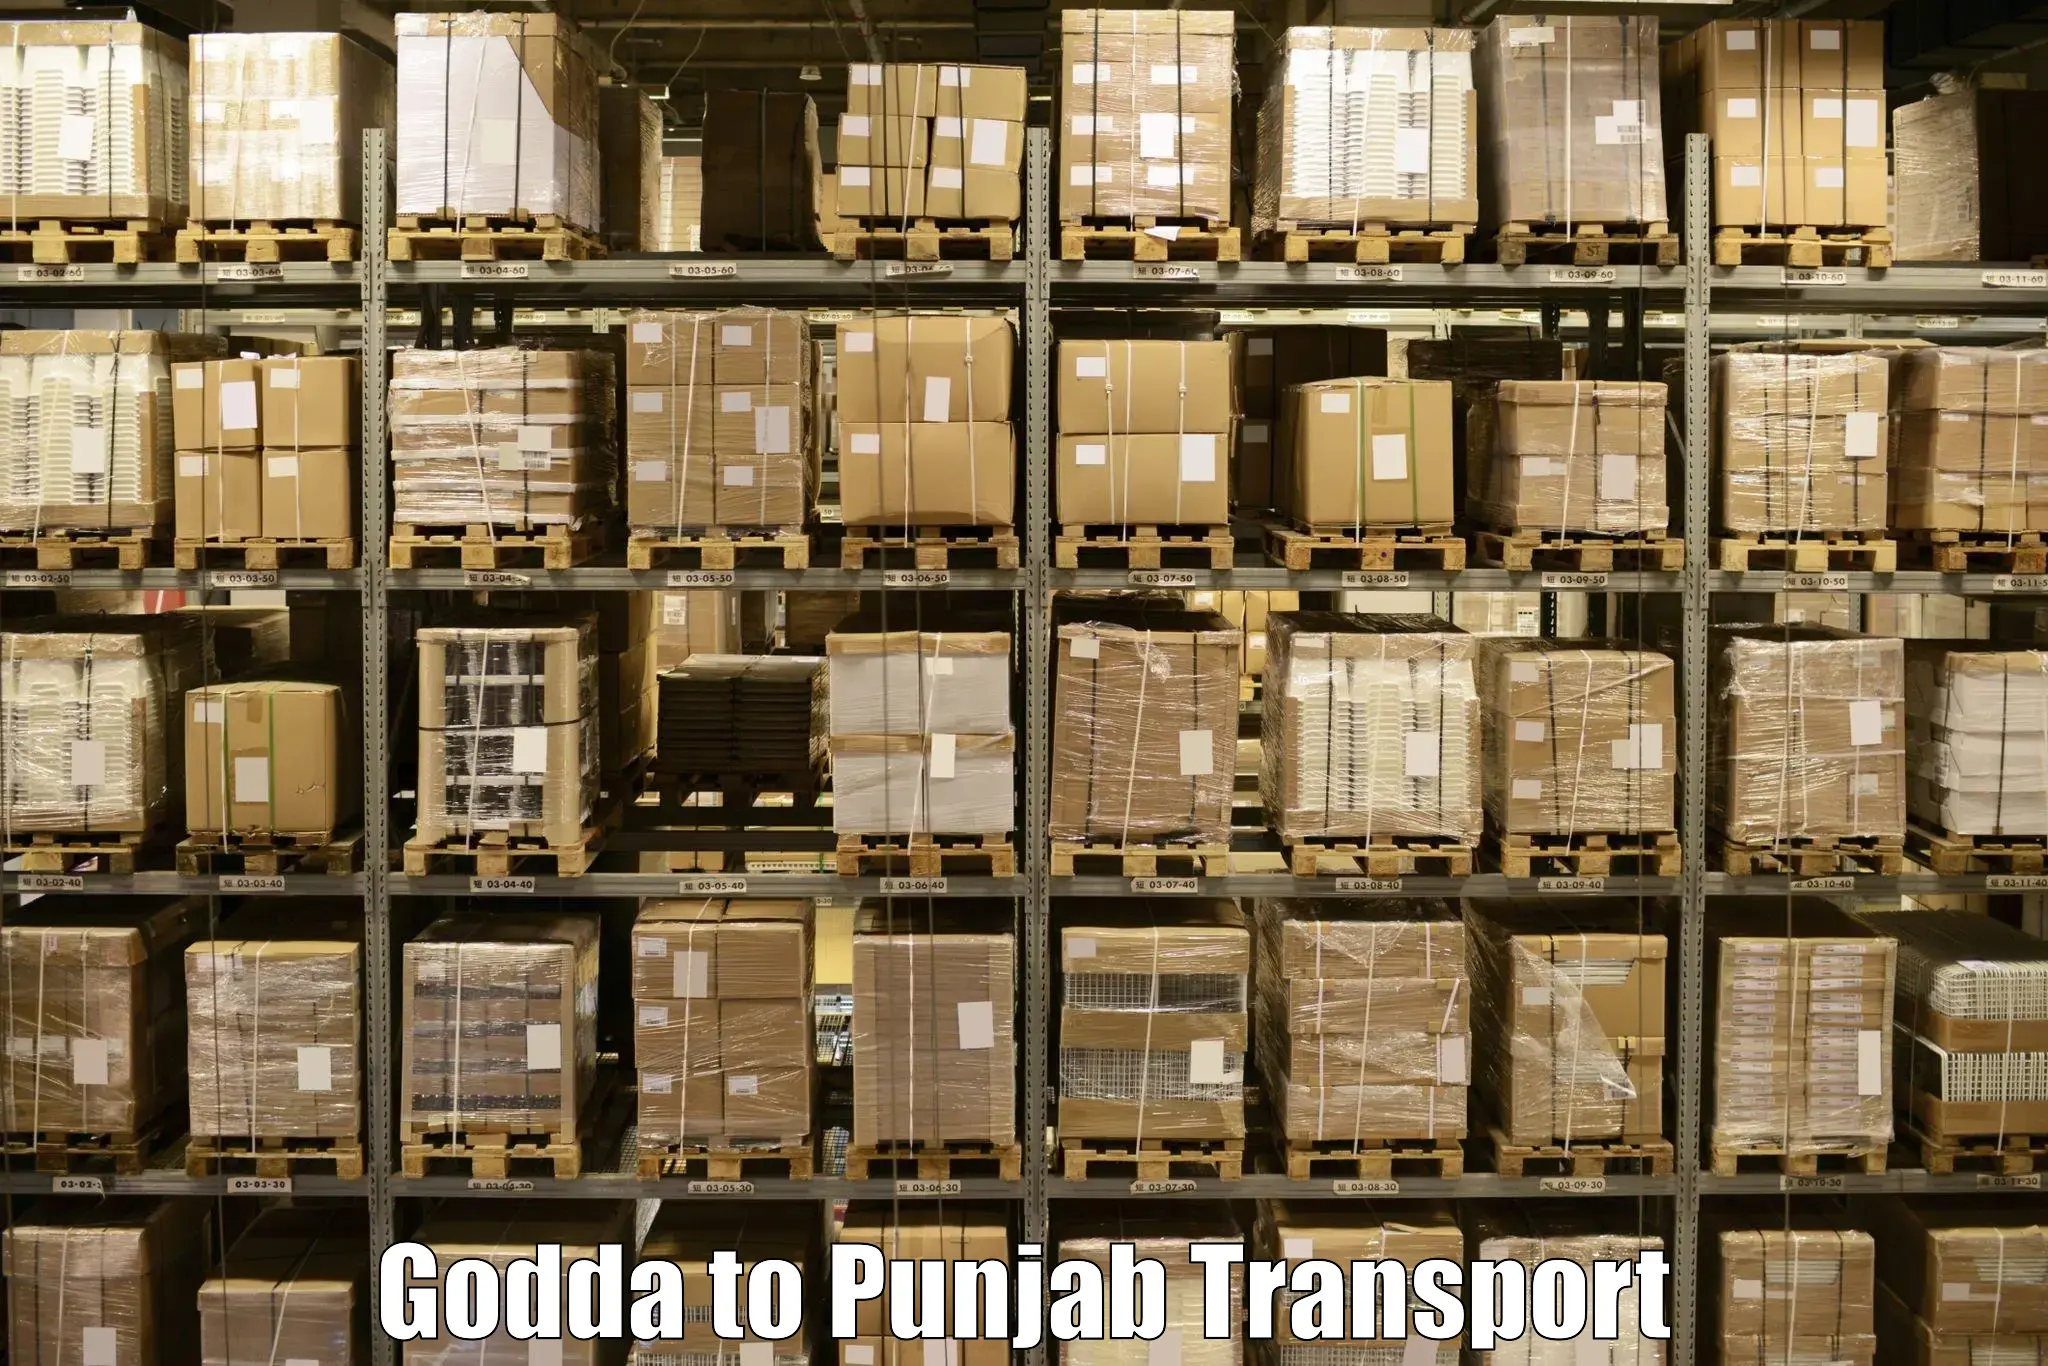 Container transportation services Godda to Sultanpur Lodhi